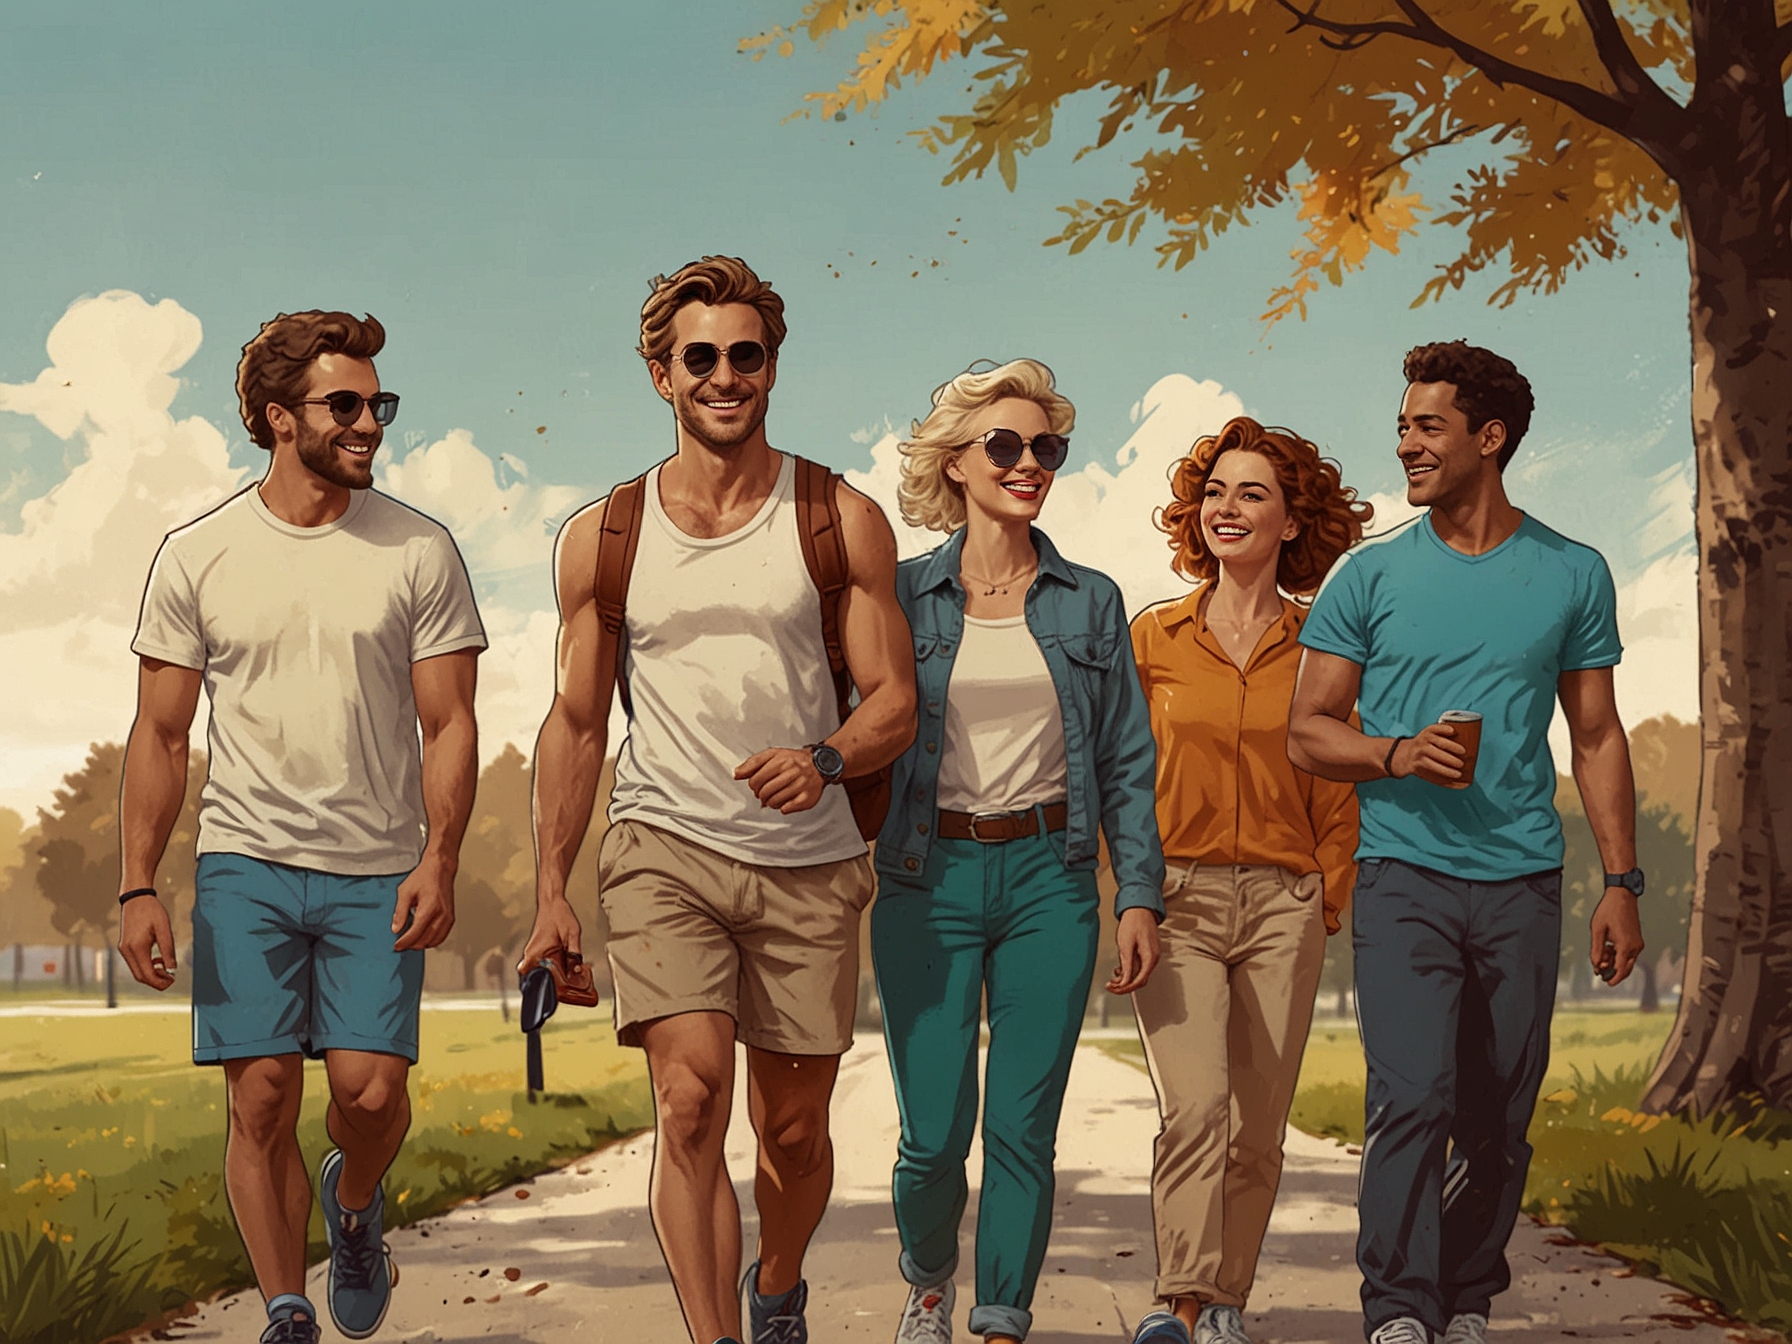 A group of friends engaging in retro walking together on a sunny day. The social activity underscores the motivational and enjoyable aspects of incorporating retro walking into a fitness routine.